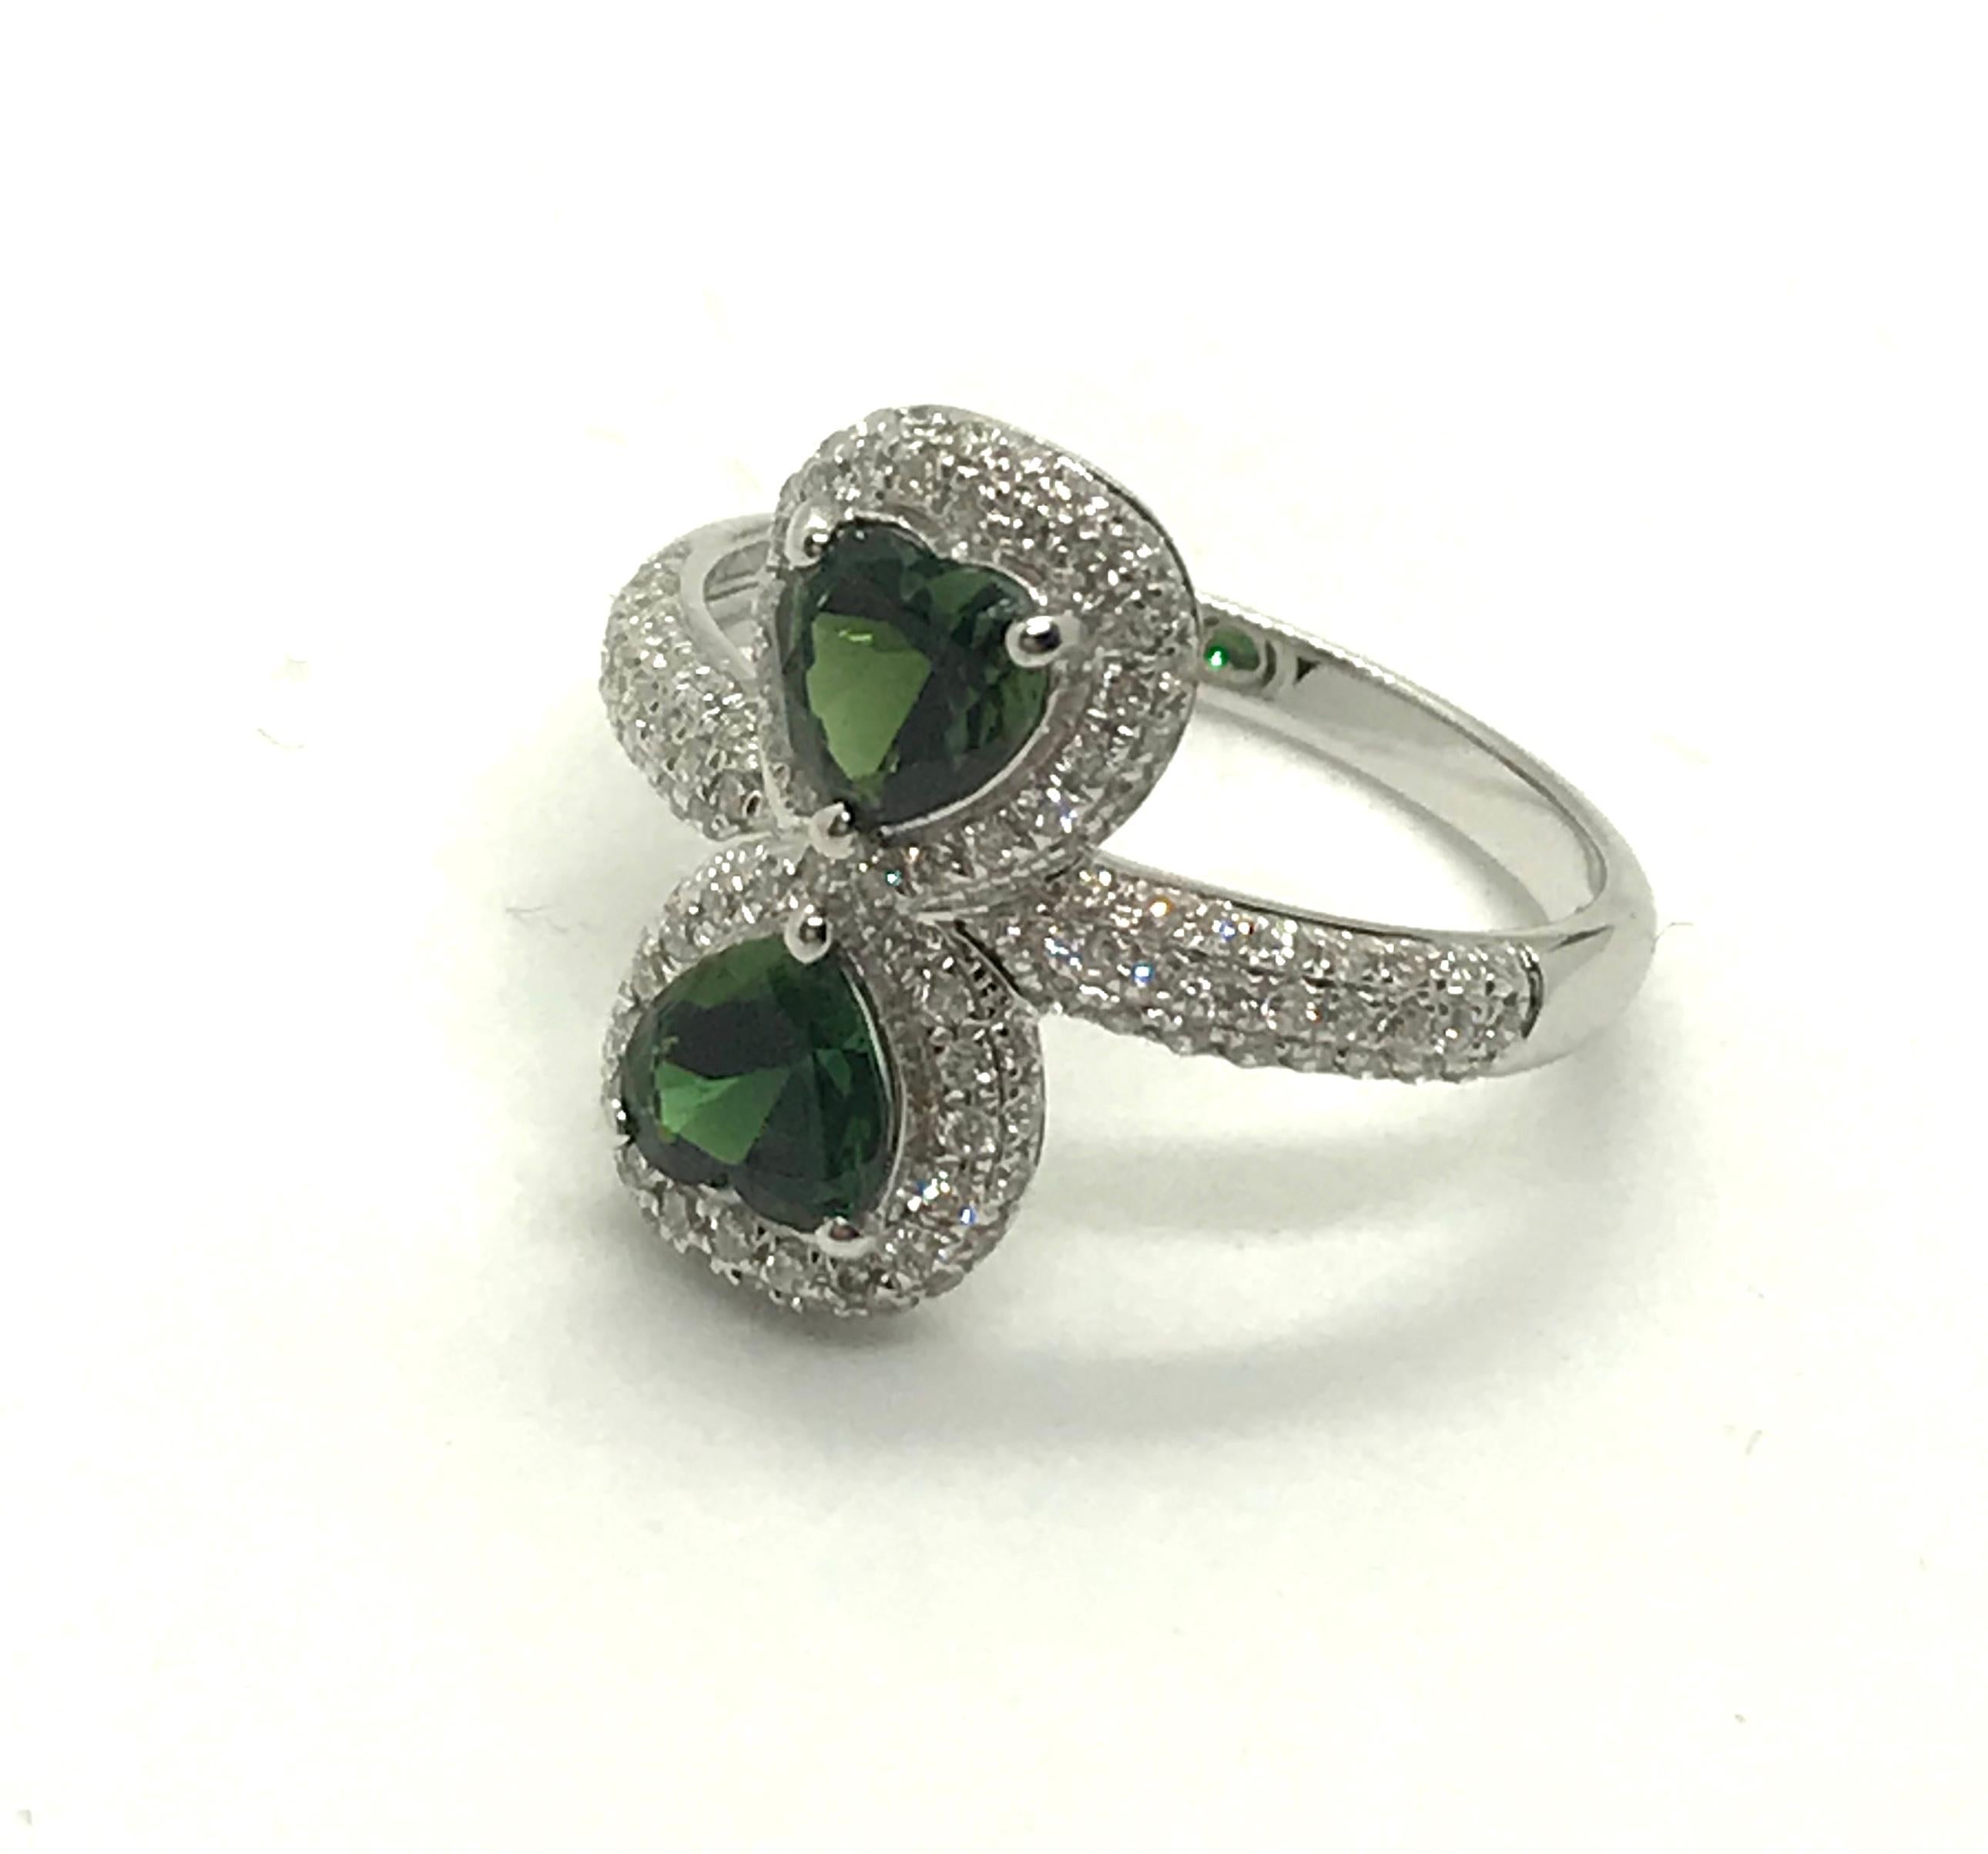 A 18K white gold, diamonds (0,454 ct) and heart-shaped green tourmalines (0,91ct) ring.Size 53.
“Eight of hearts” diamonds and colored stones rings offer a double symbol : number eight brings prosperity and luck, while the two hearts symbolize love